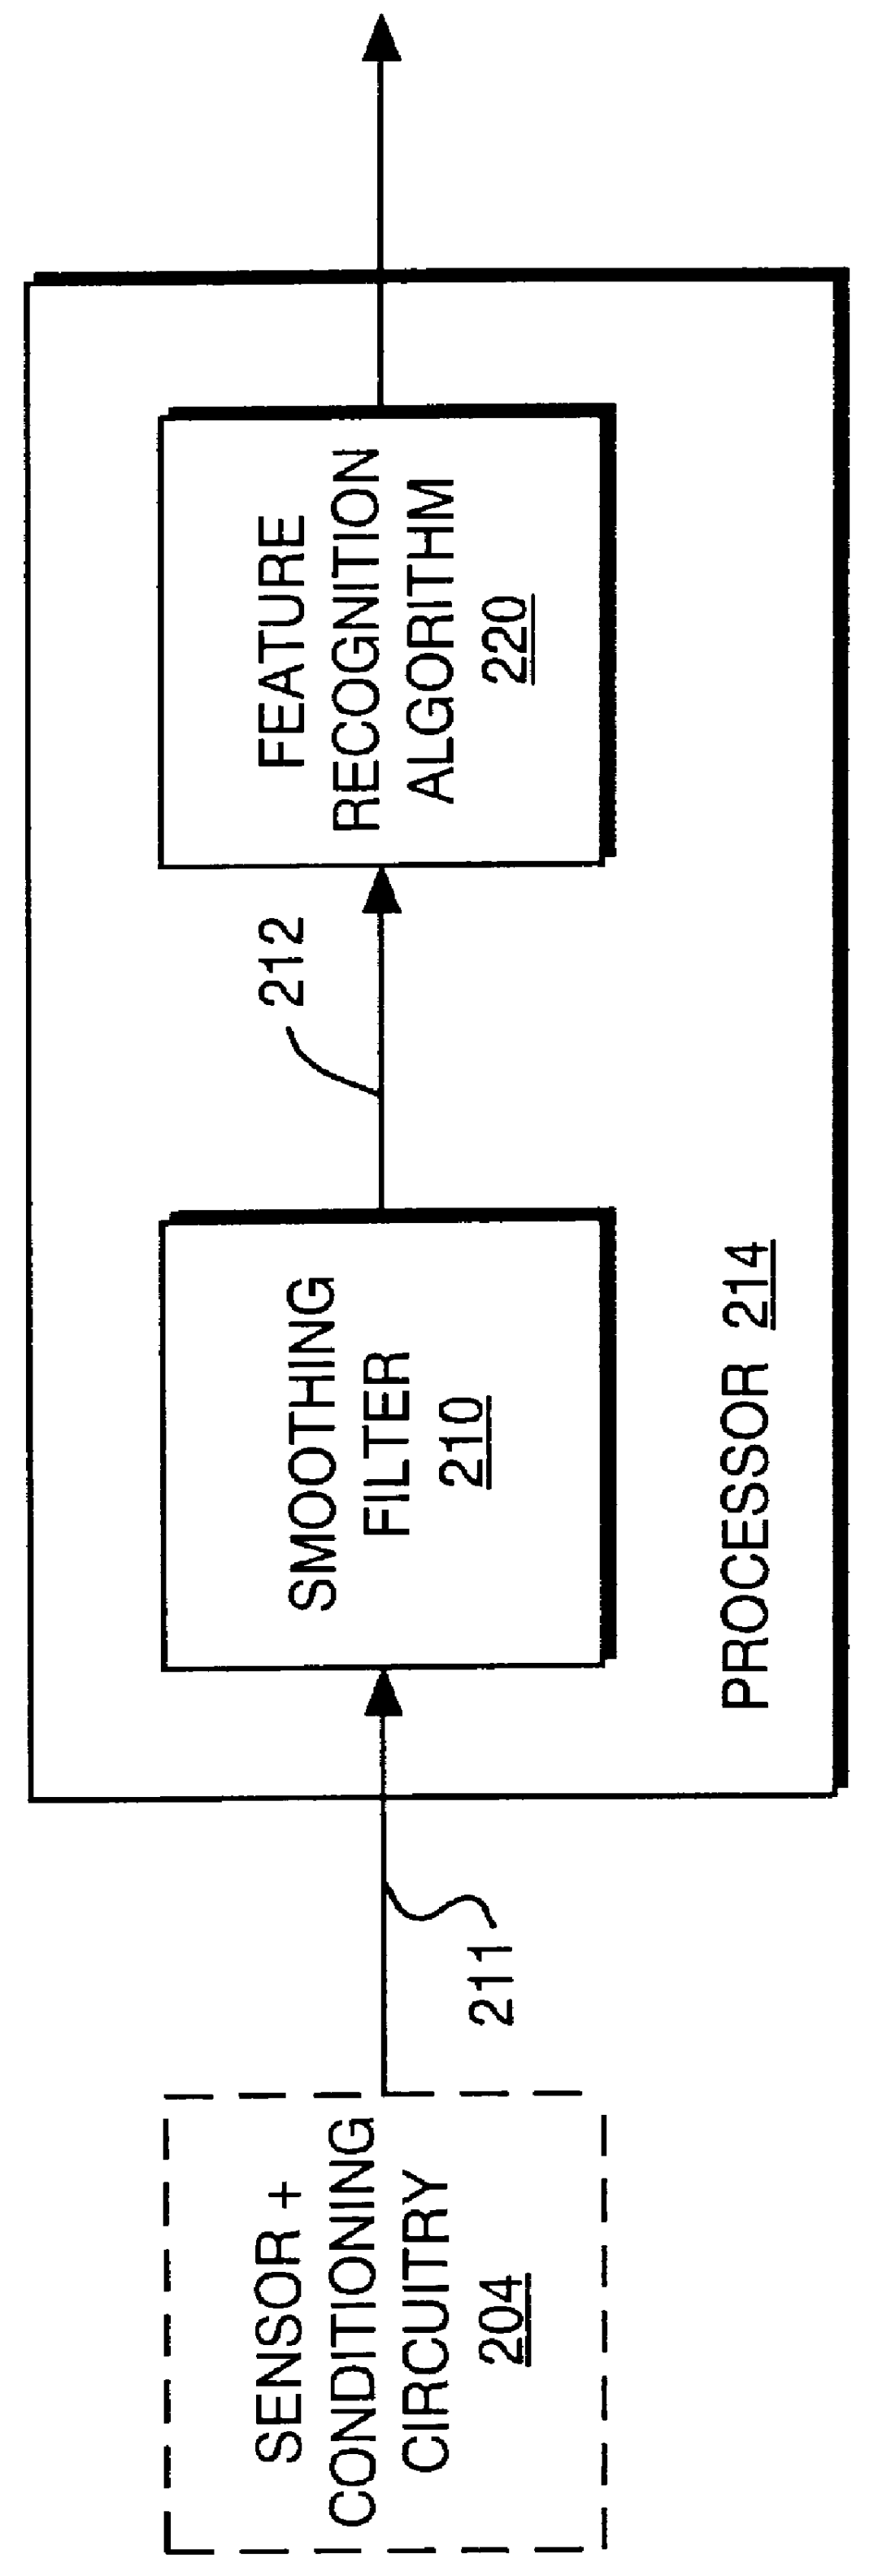 Method and apparatus for boil state detection based on acoustic signal features